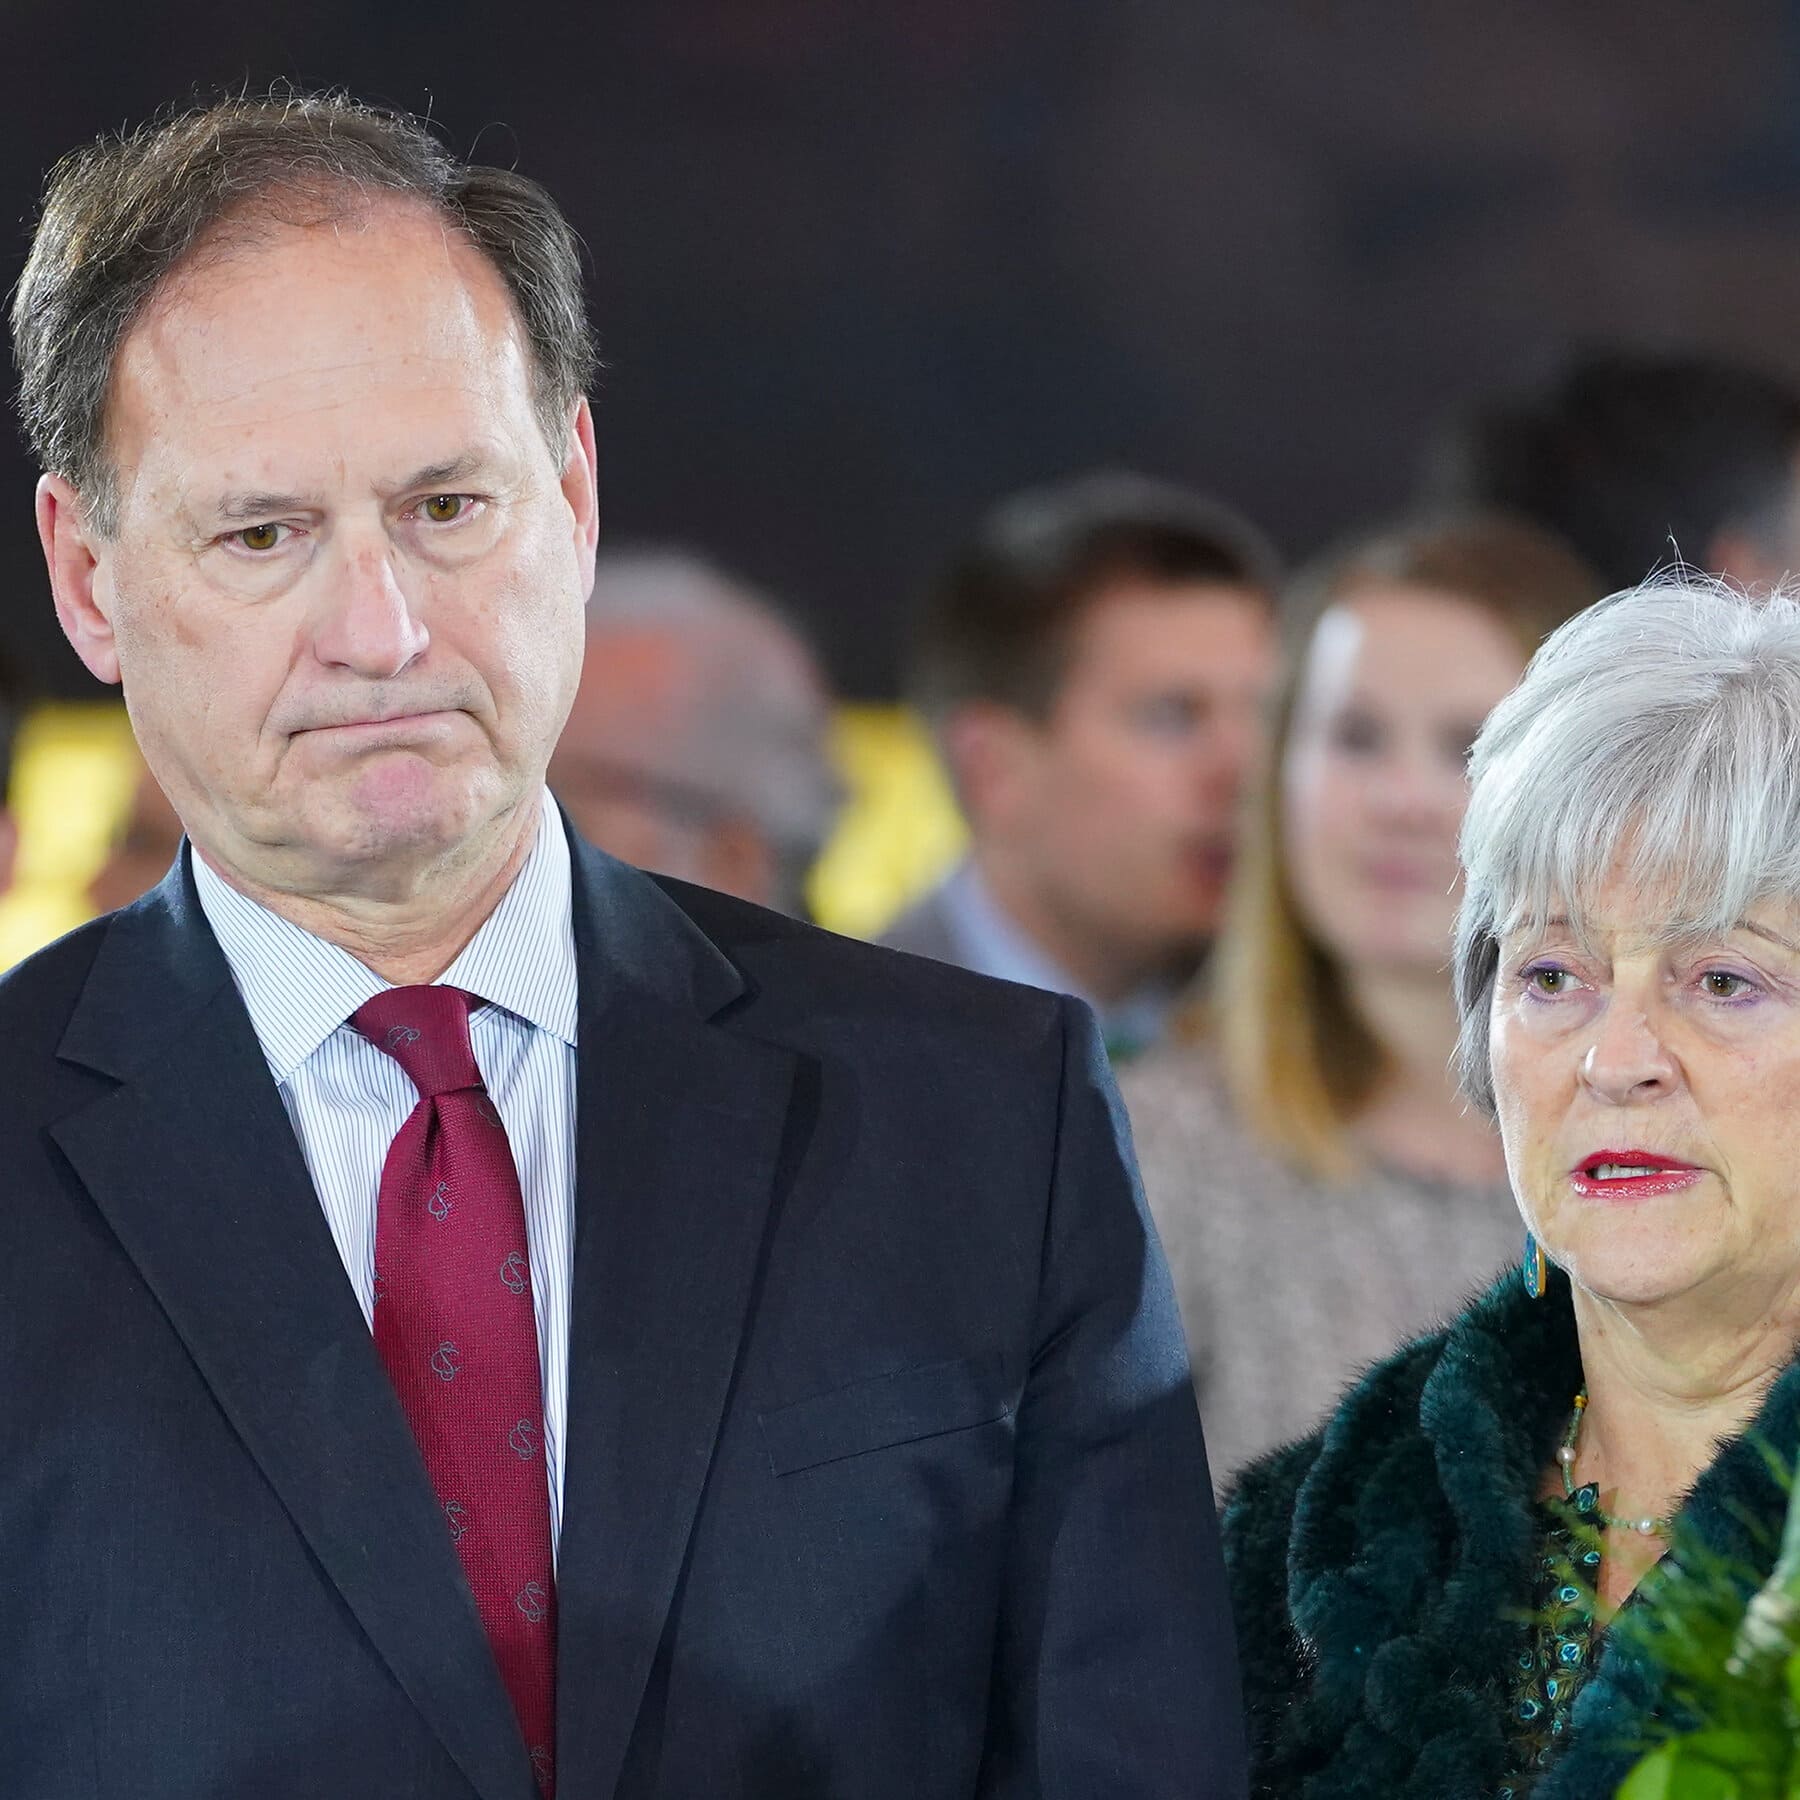 Justice Alito’s Wife, in Secretly Recorded Conversation, Complains About Pride Flag